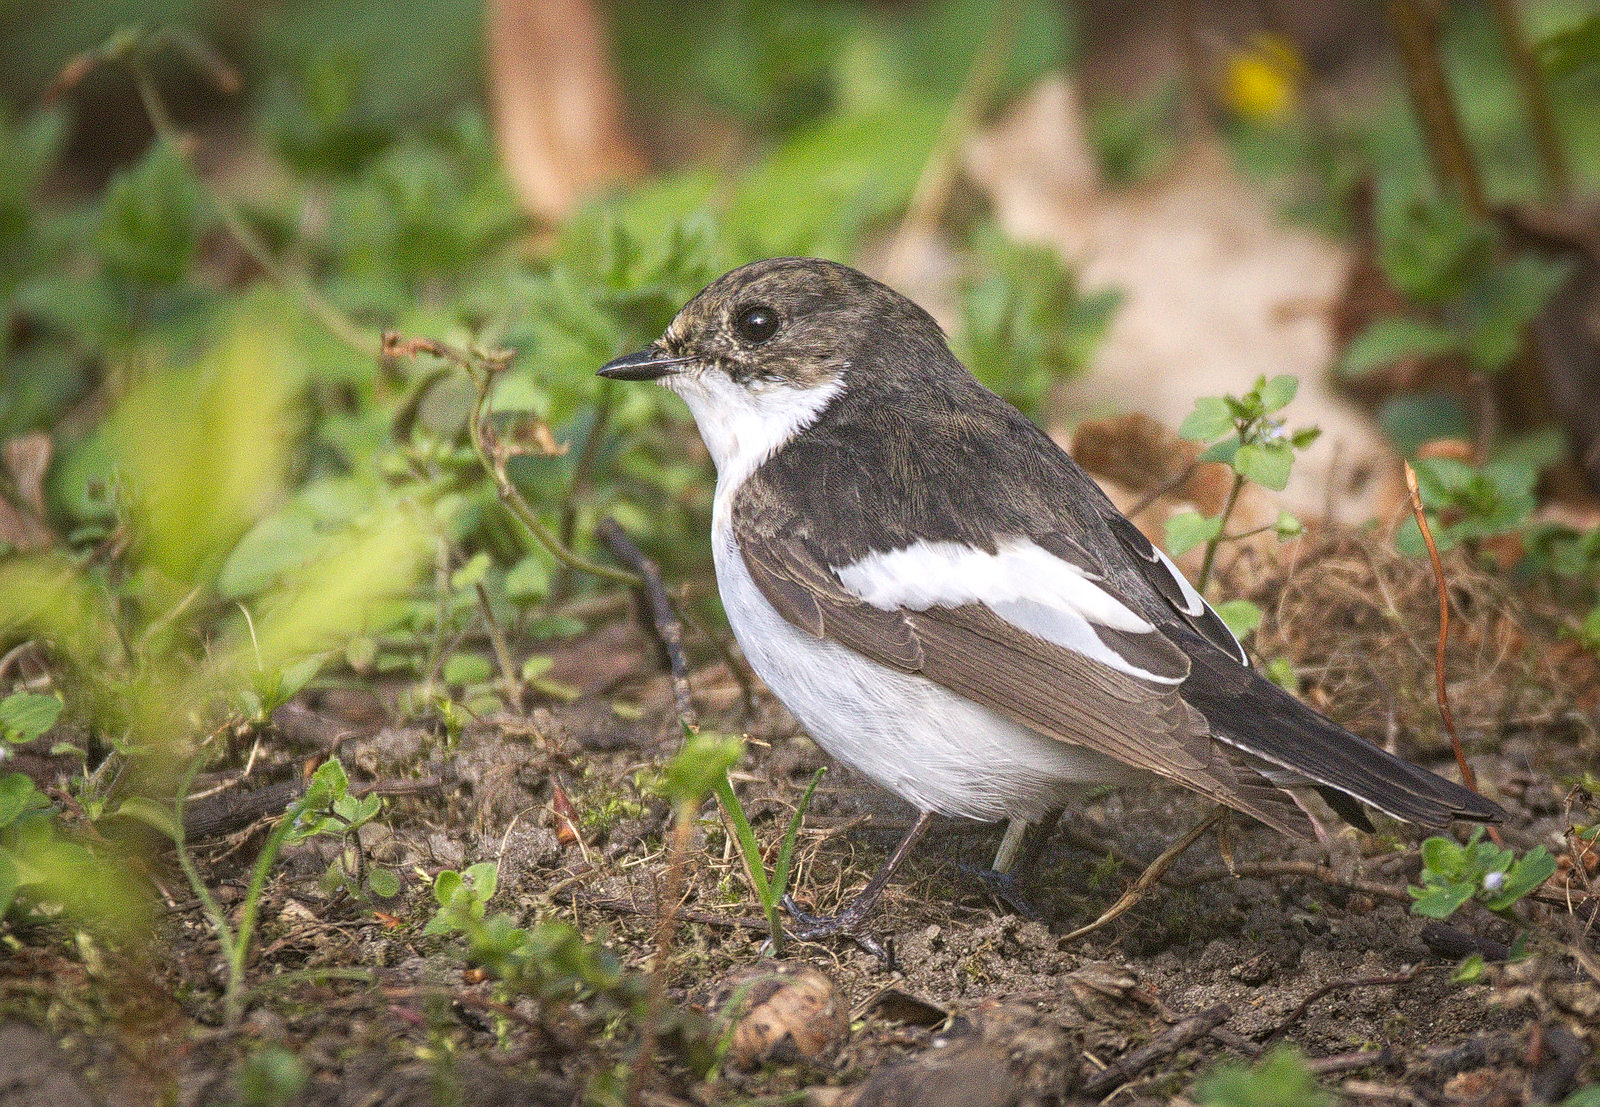 Pied flycatcher stood on the ground amongst small plants and grass.